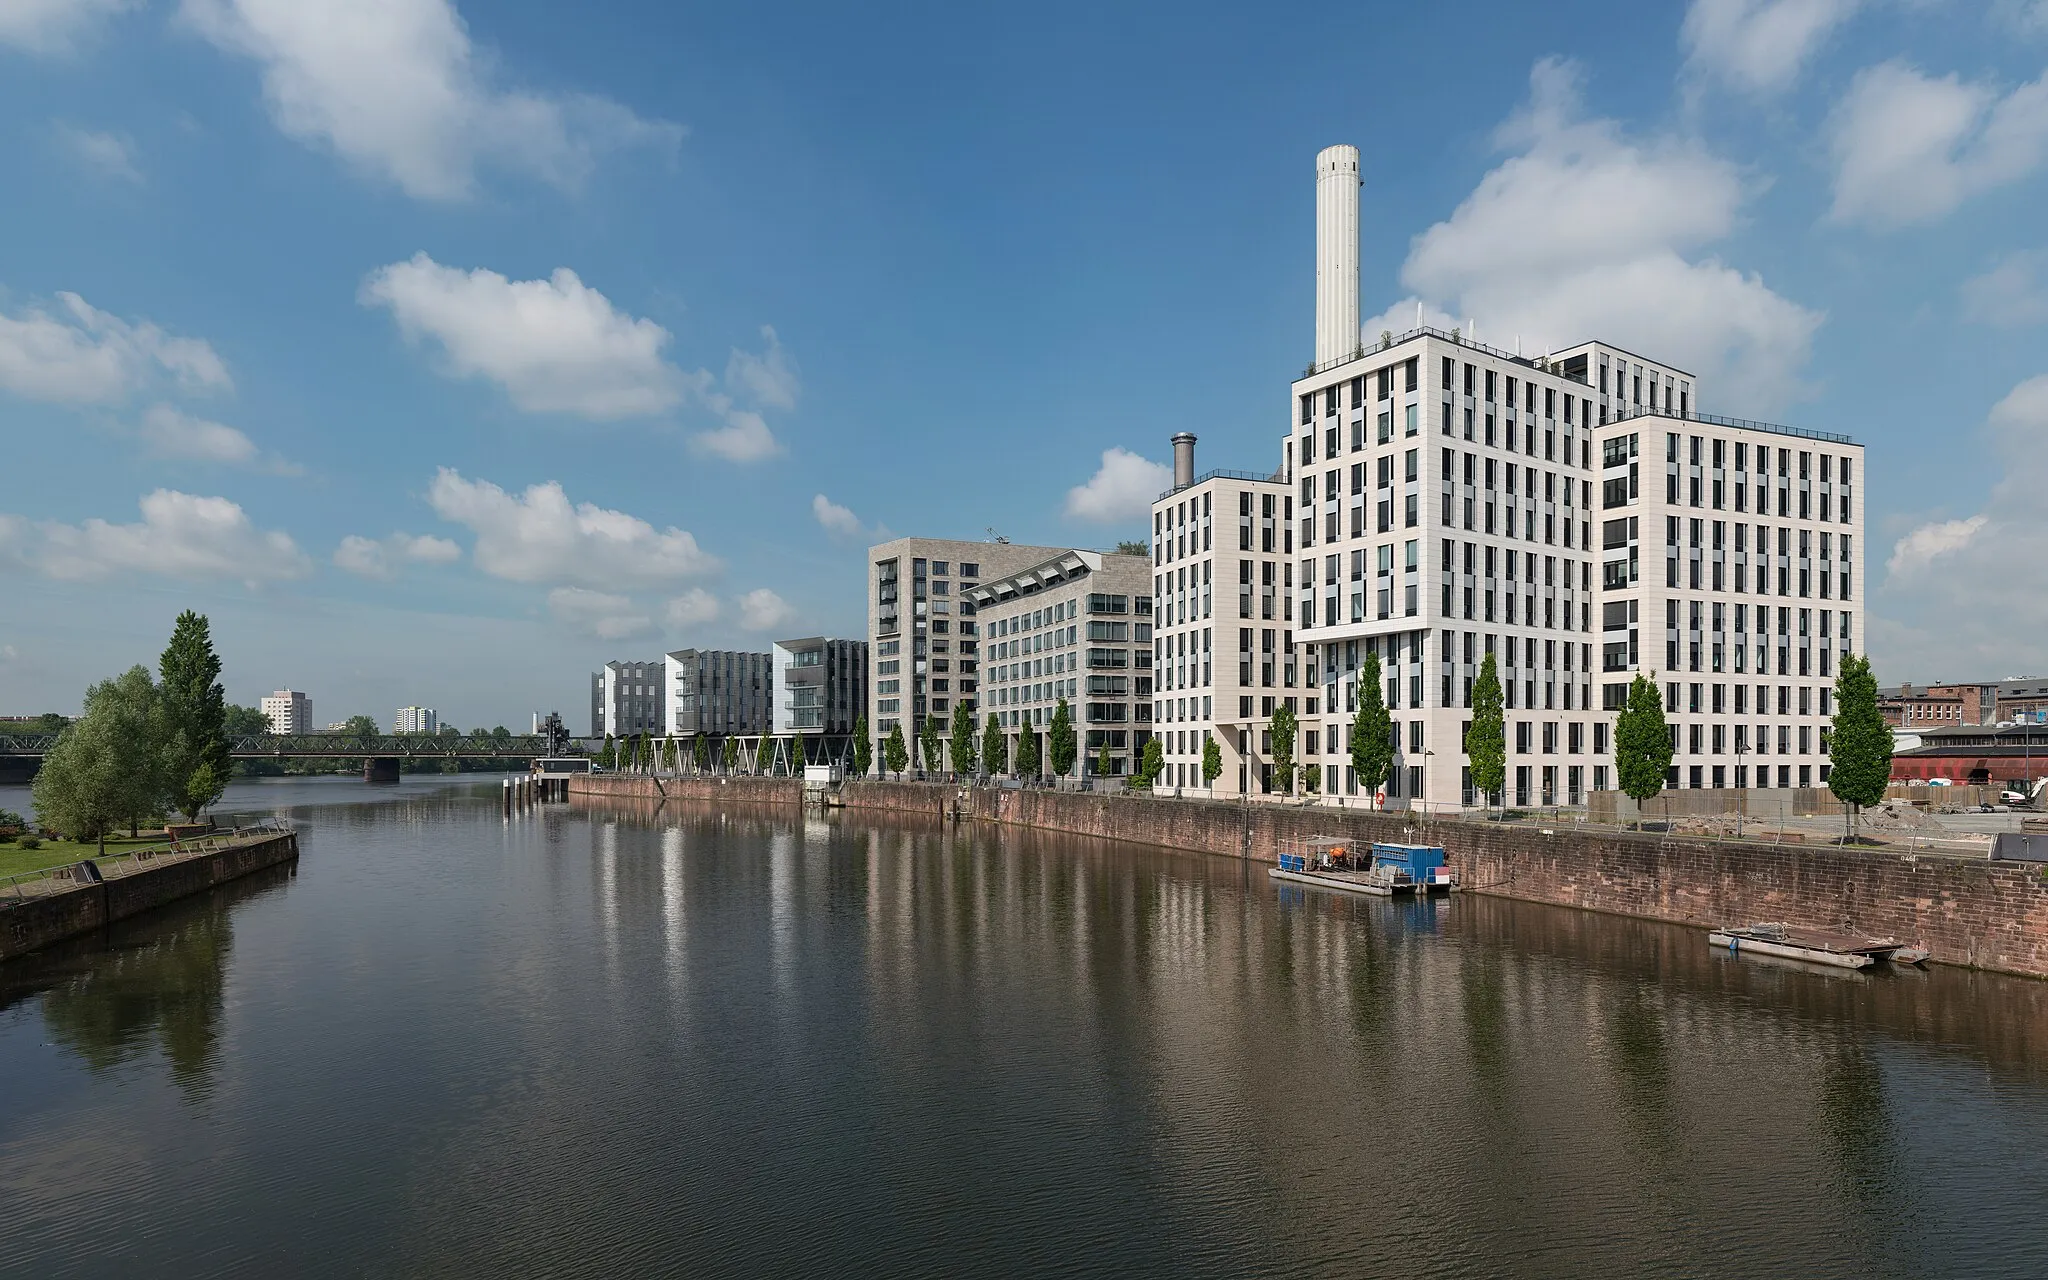 Photo showing: An east view of office buildings located at the Westhafen area of Frankfurt am Main. Depicted are from left to right: Westhafen-Pier, Torhaus Westhafen,  Werfthaus